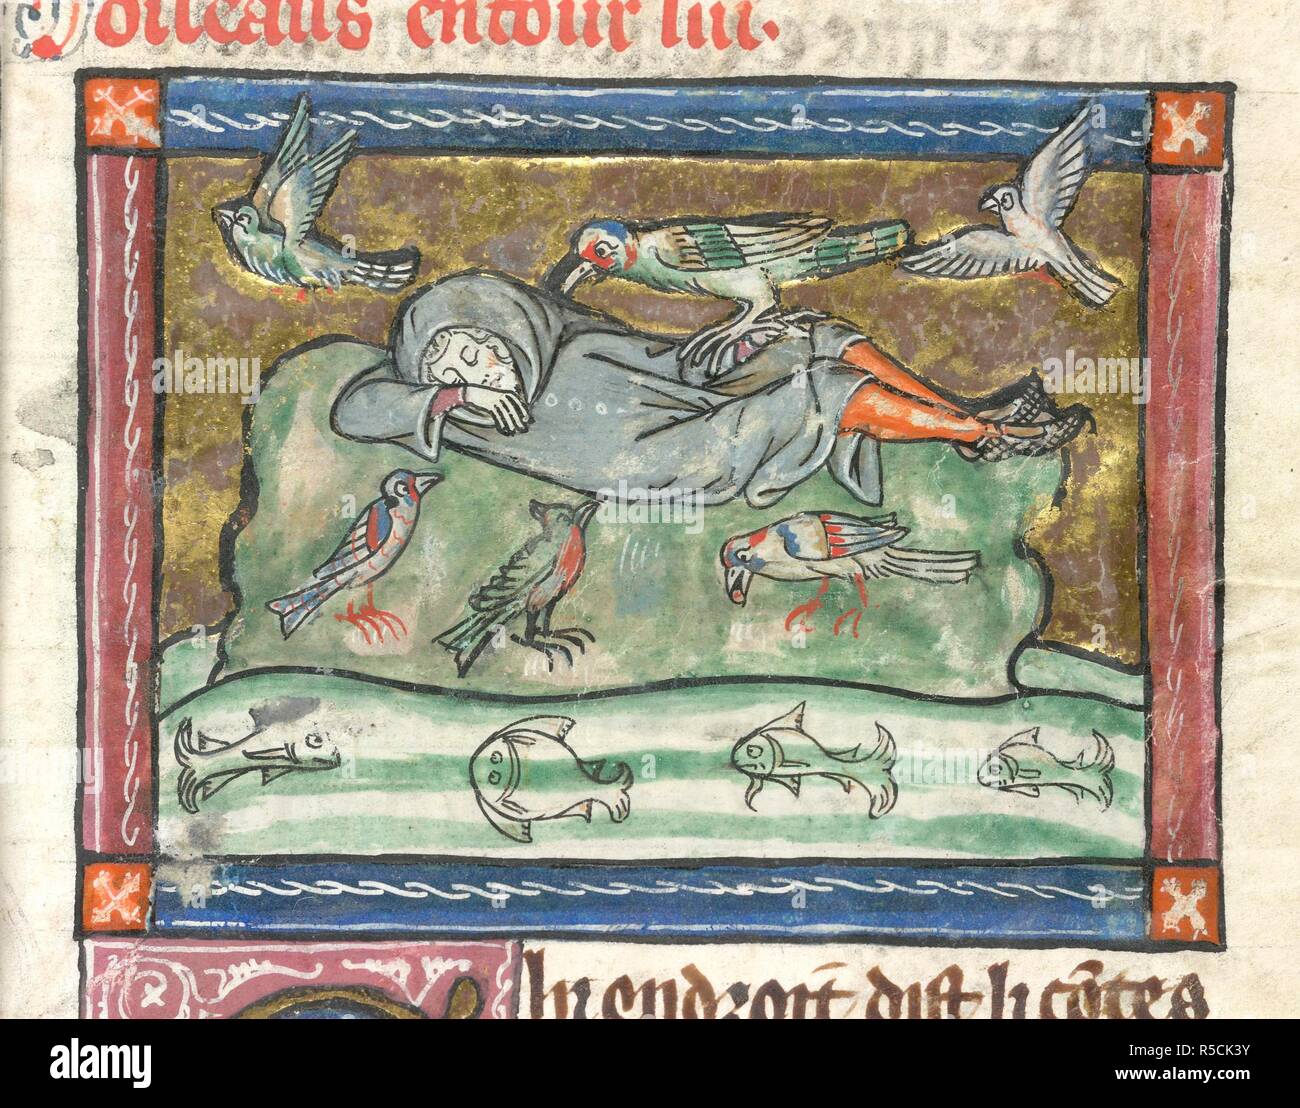 A sleeping man surrounded by birds. . L'Estoire del Saint Graal. Beginning of the xivth century. Image taken from L'Estoire del Saint Graal. Source: Add. 10292, f.29. Language: French. Stock Photo